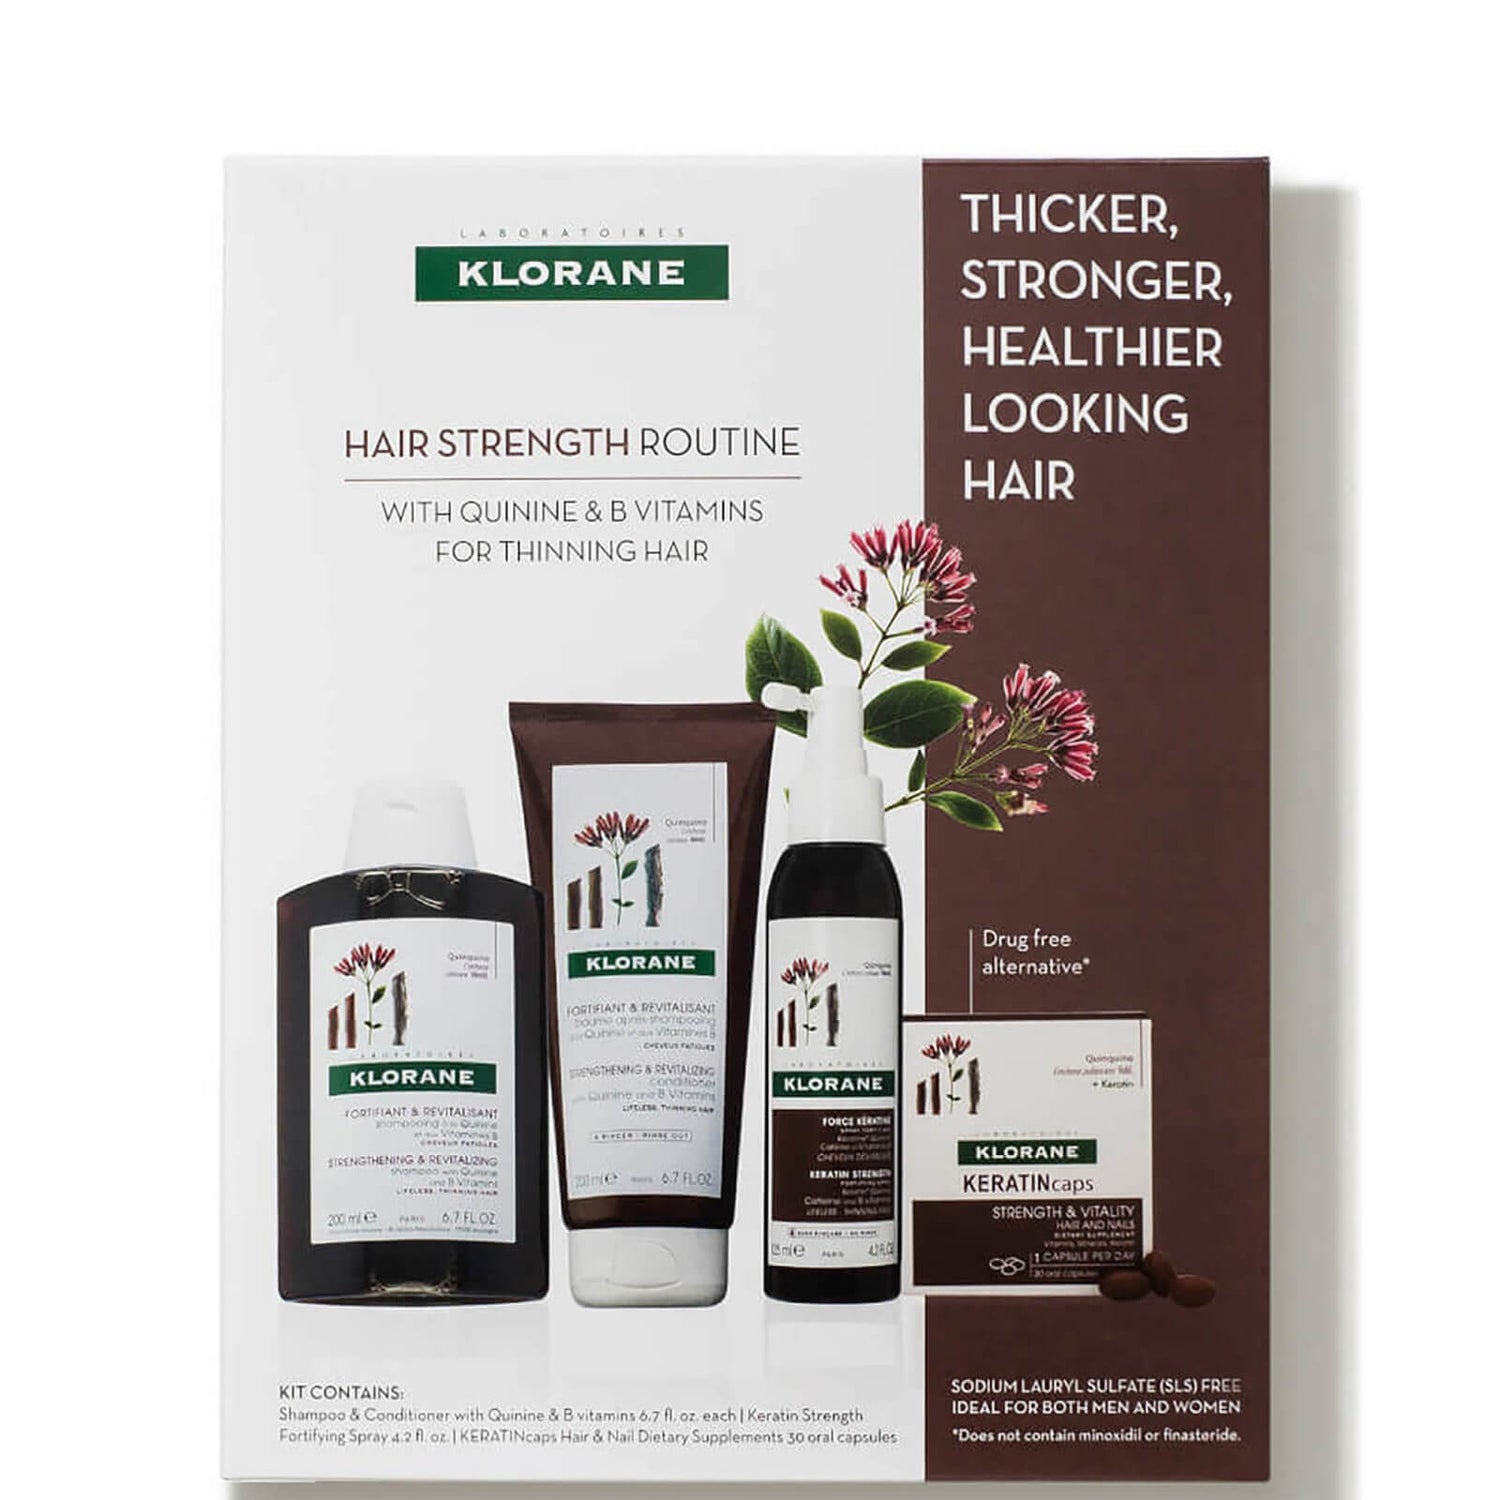 KLORANE Hair Strength Routine with Quinine B Vitamins for Thinning Hair (4 piece)